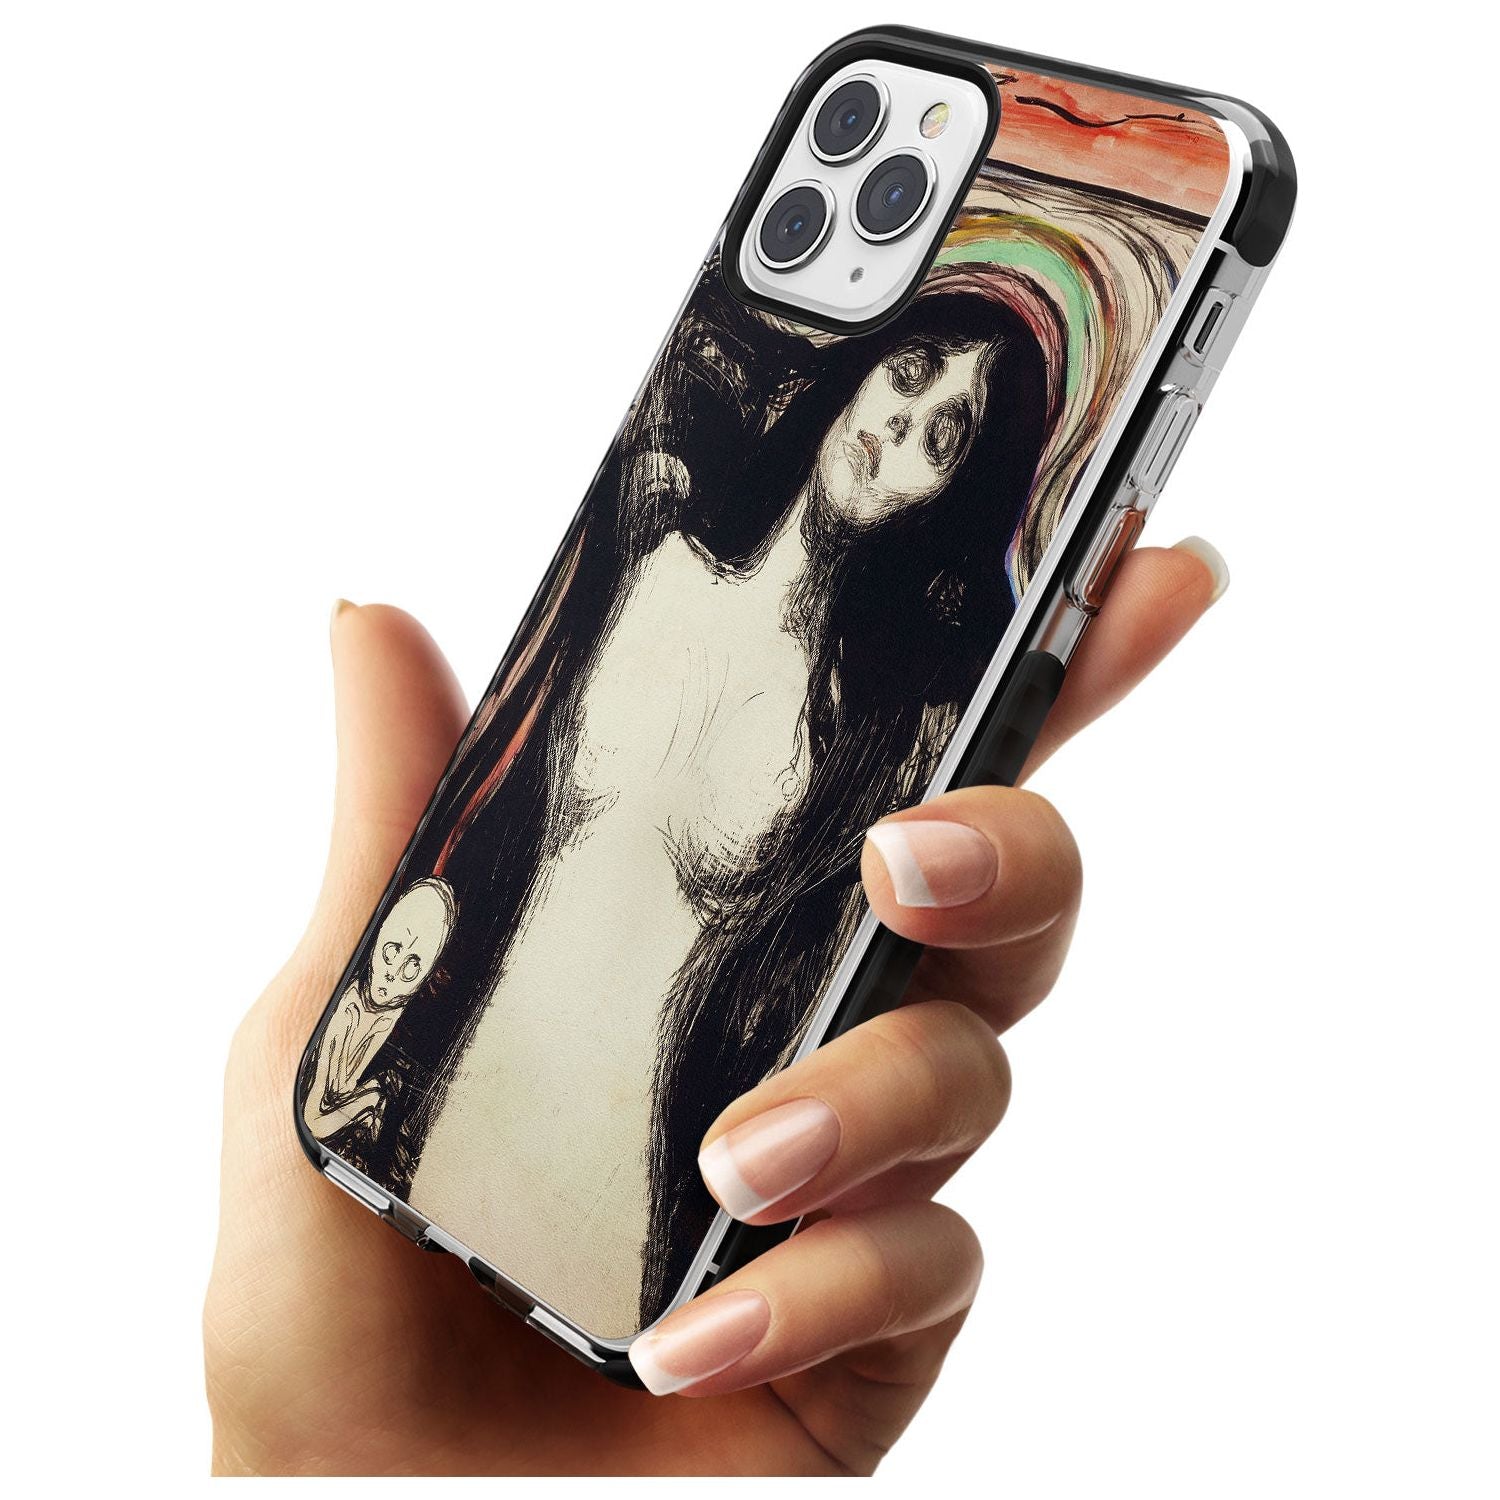 Madonna Black Impact Phone Case for iPhone 11